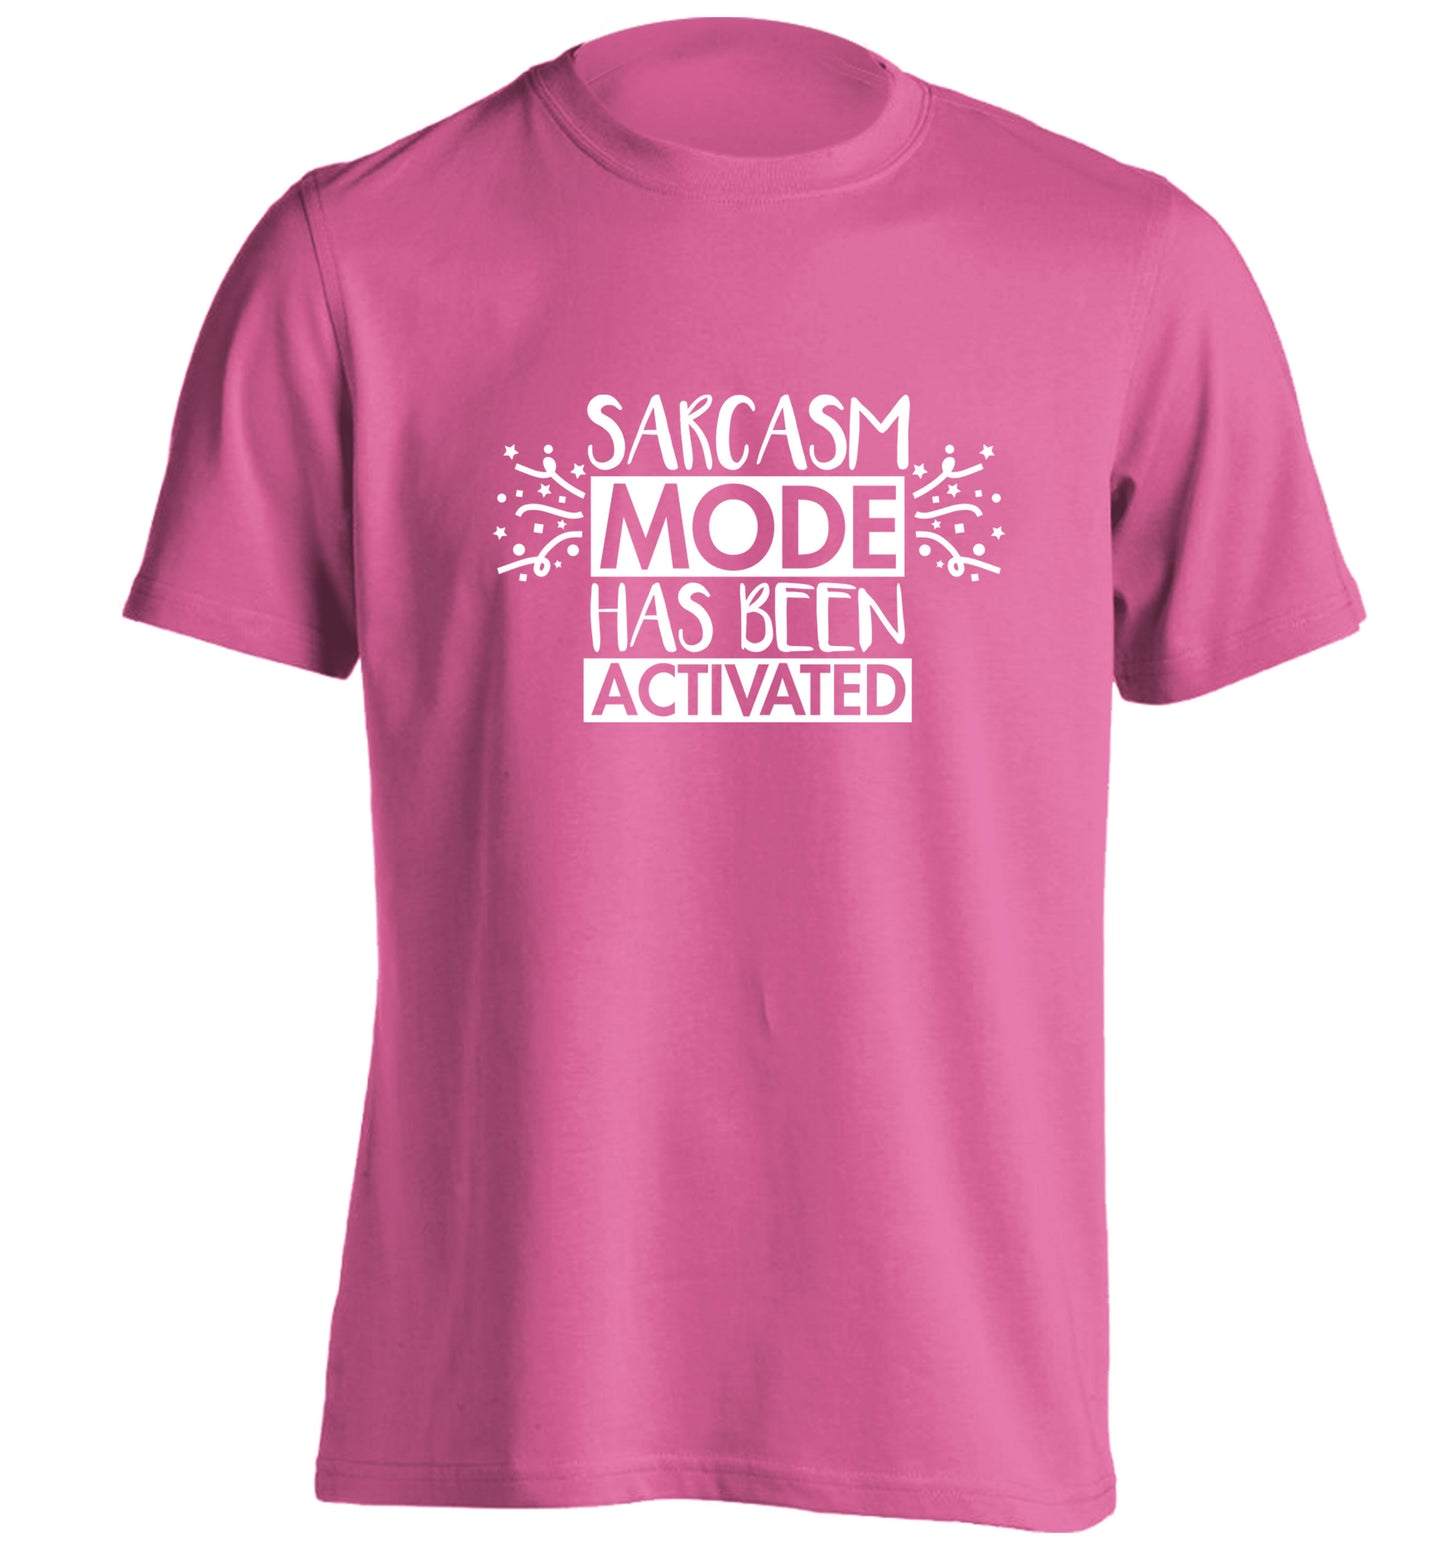 Sarcarsm mode has been activated adults unisex pink Tshirt 2XL